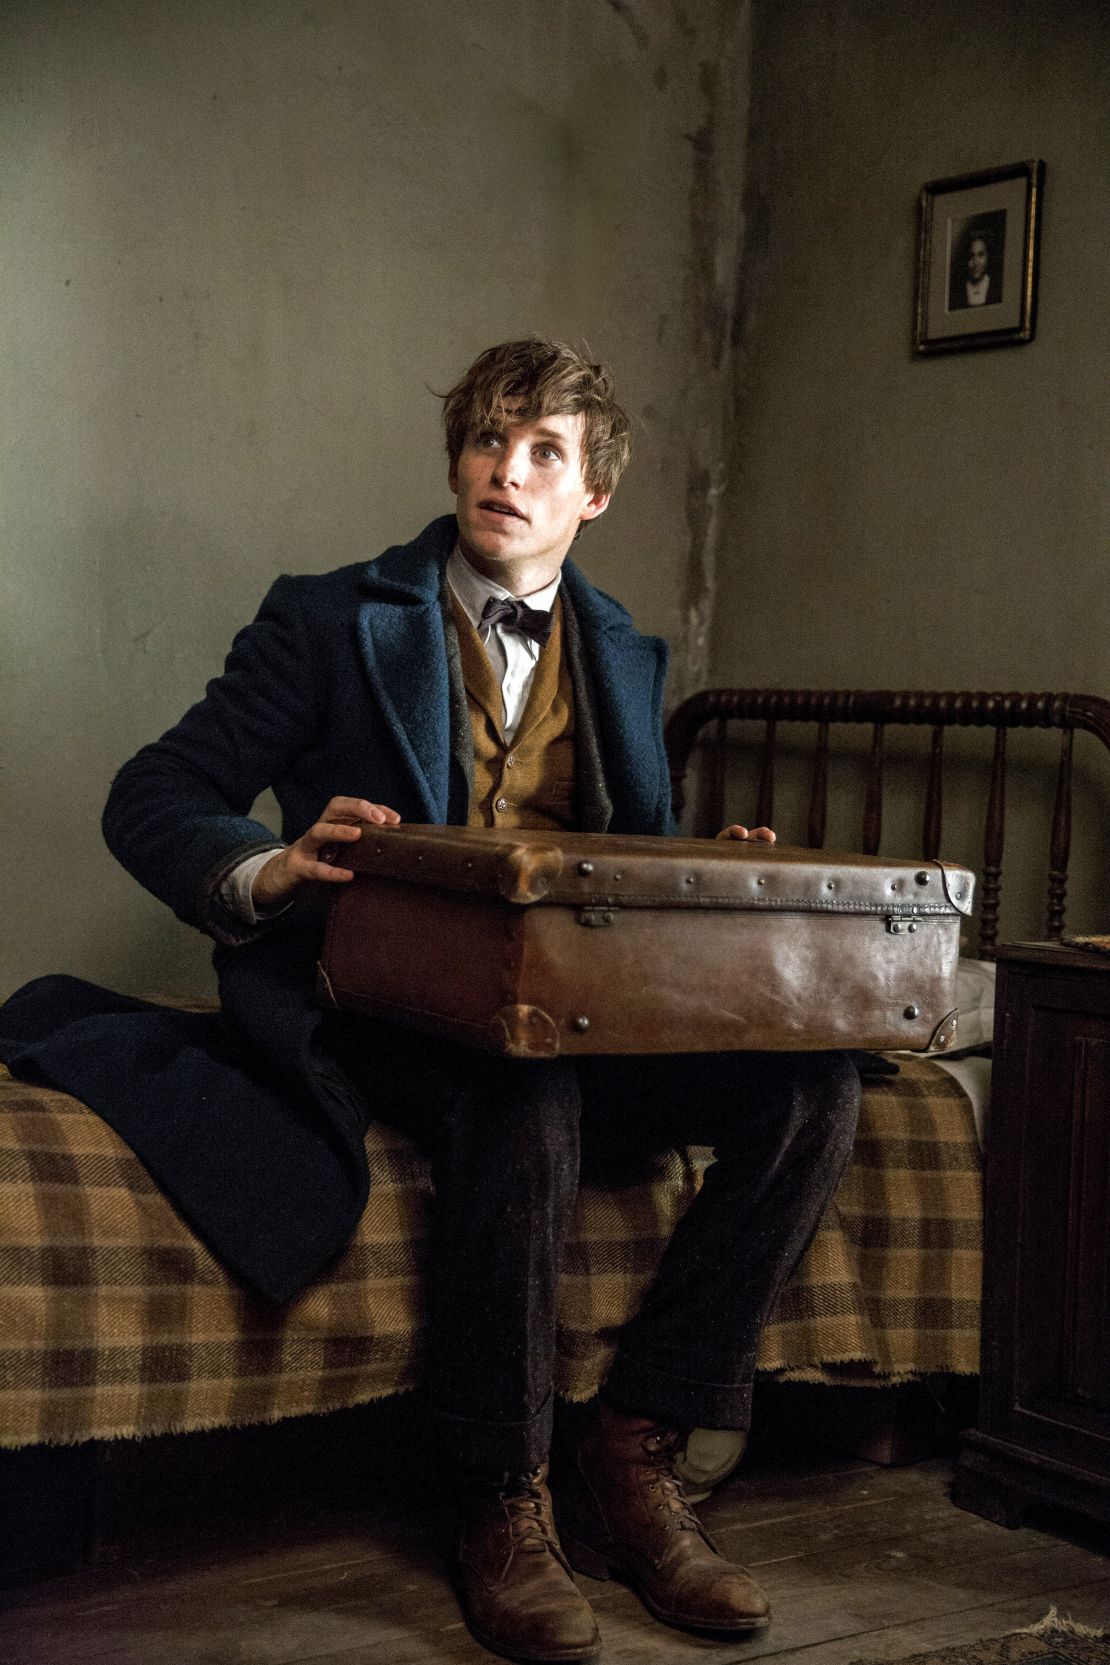 Eddie Redmayne in 'Fantastic Beasts and Where to Find Them'